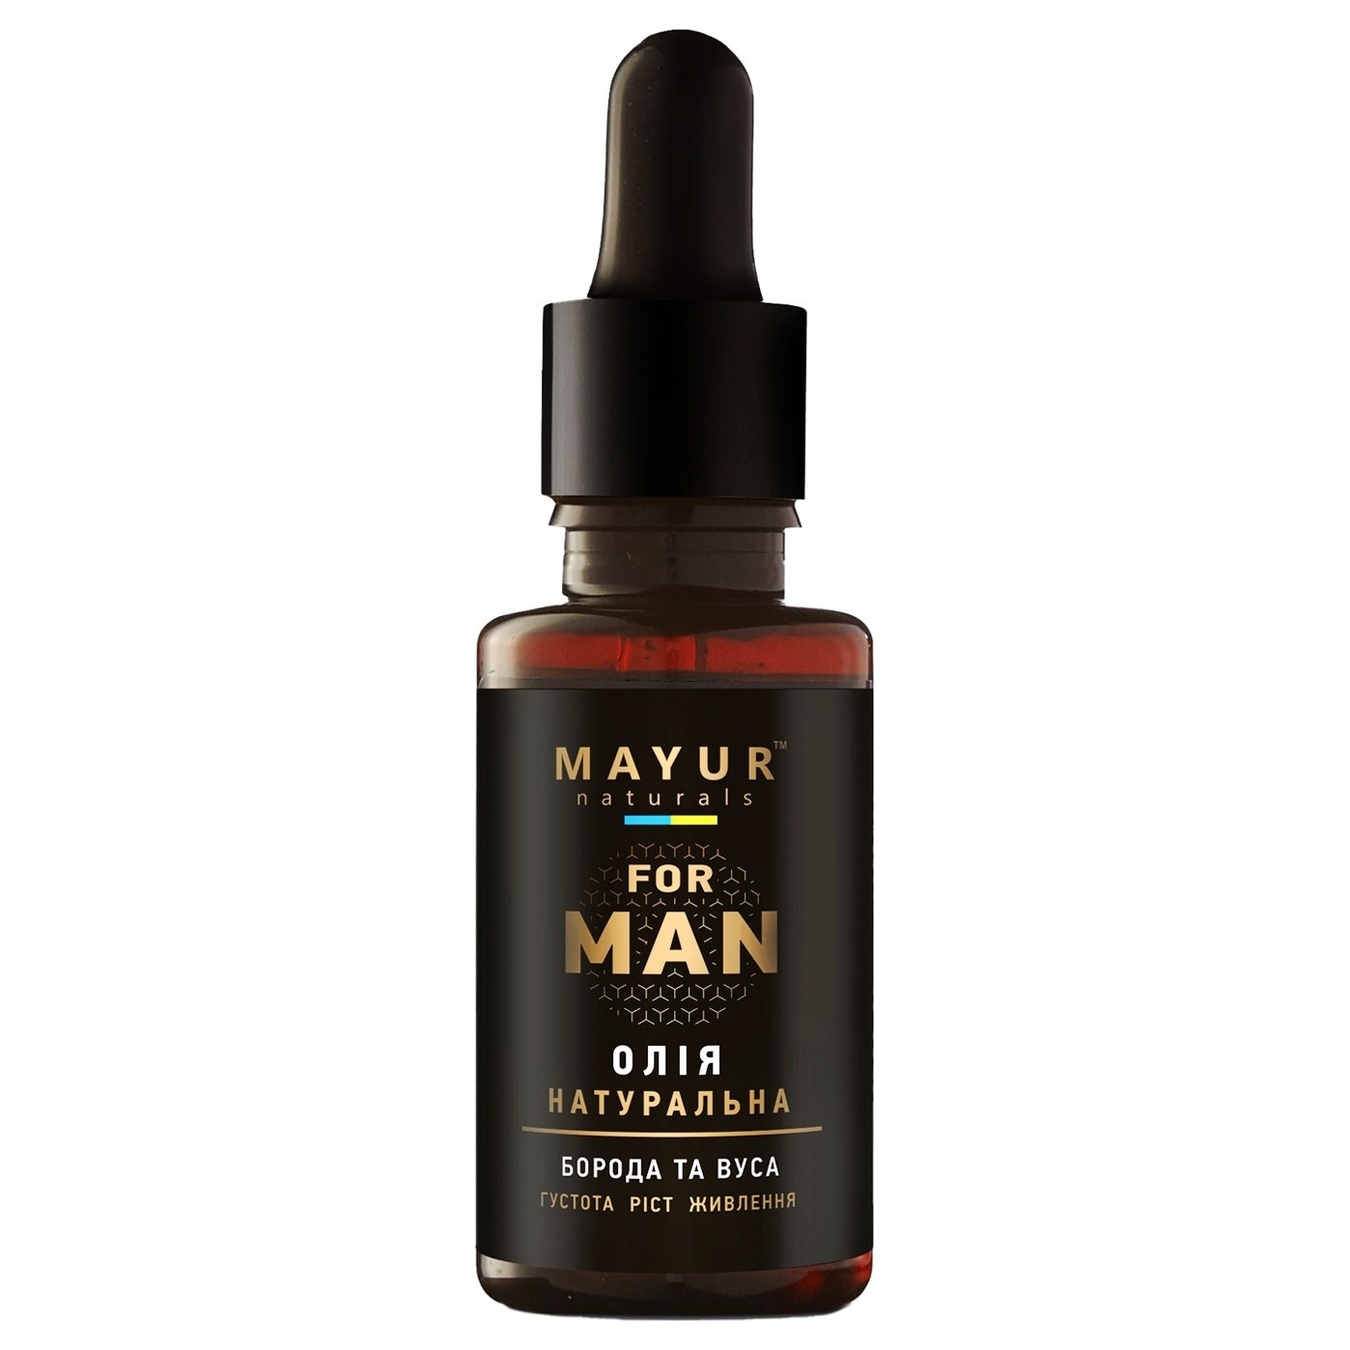 Mayur natural oil for growth and nutrition of beard and mustache 50 ml